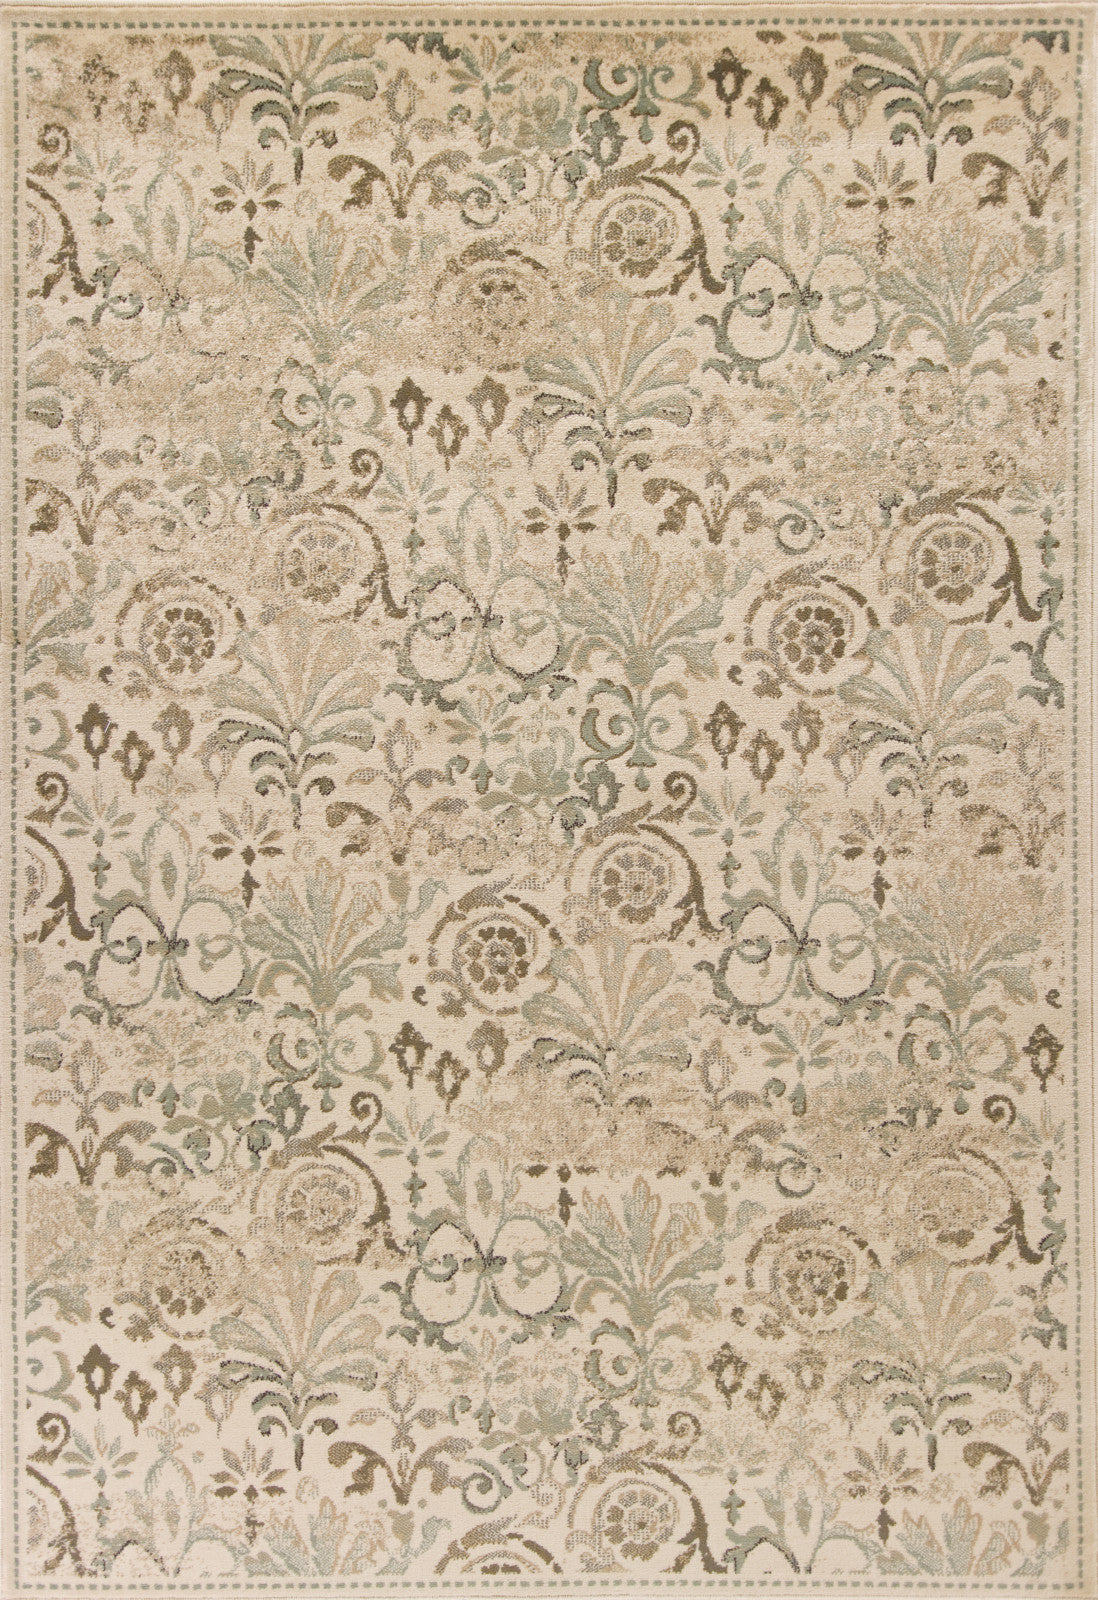 KAS Heritage 9355 Sage Accents Machine Woven Area Rug